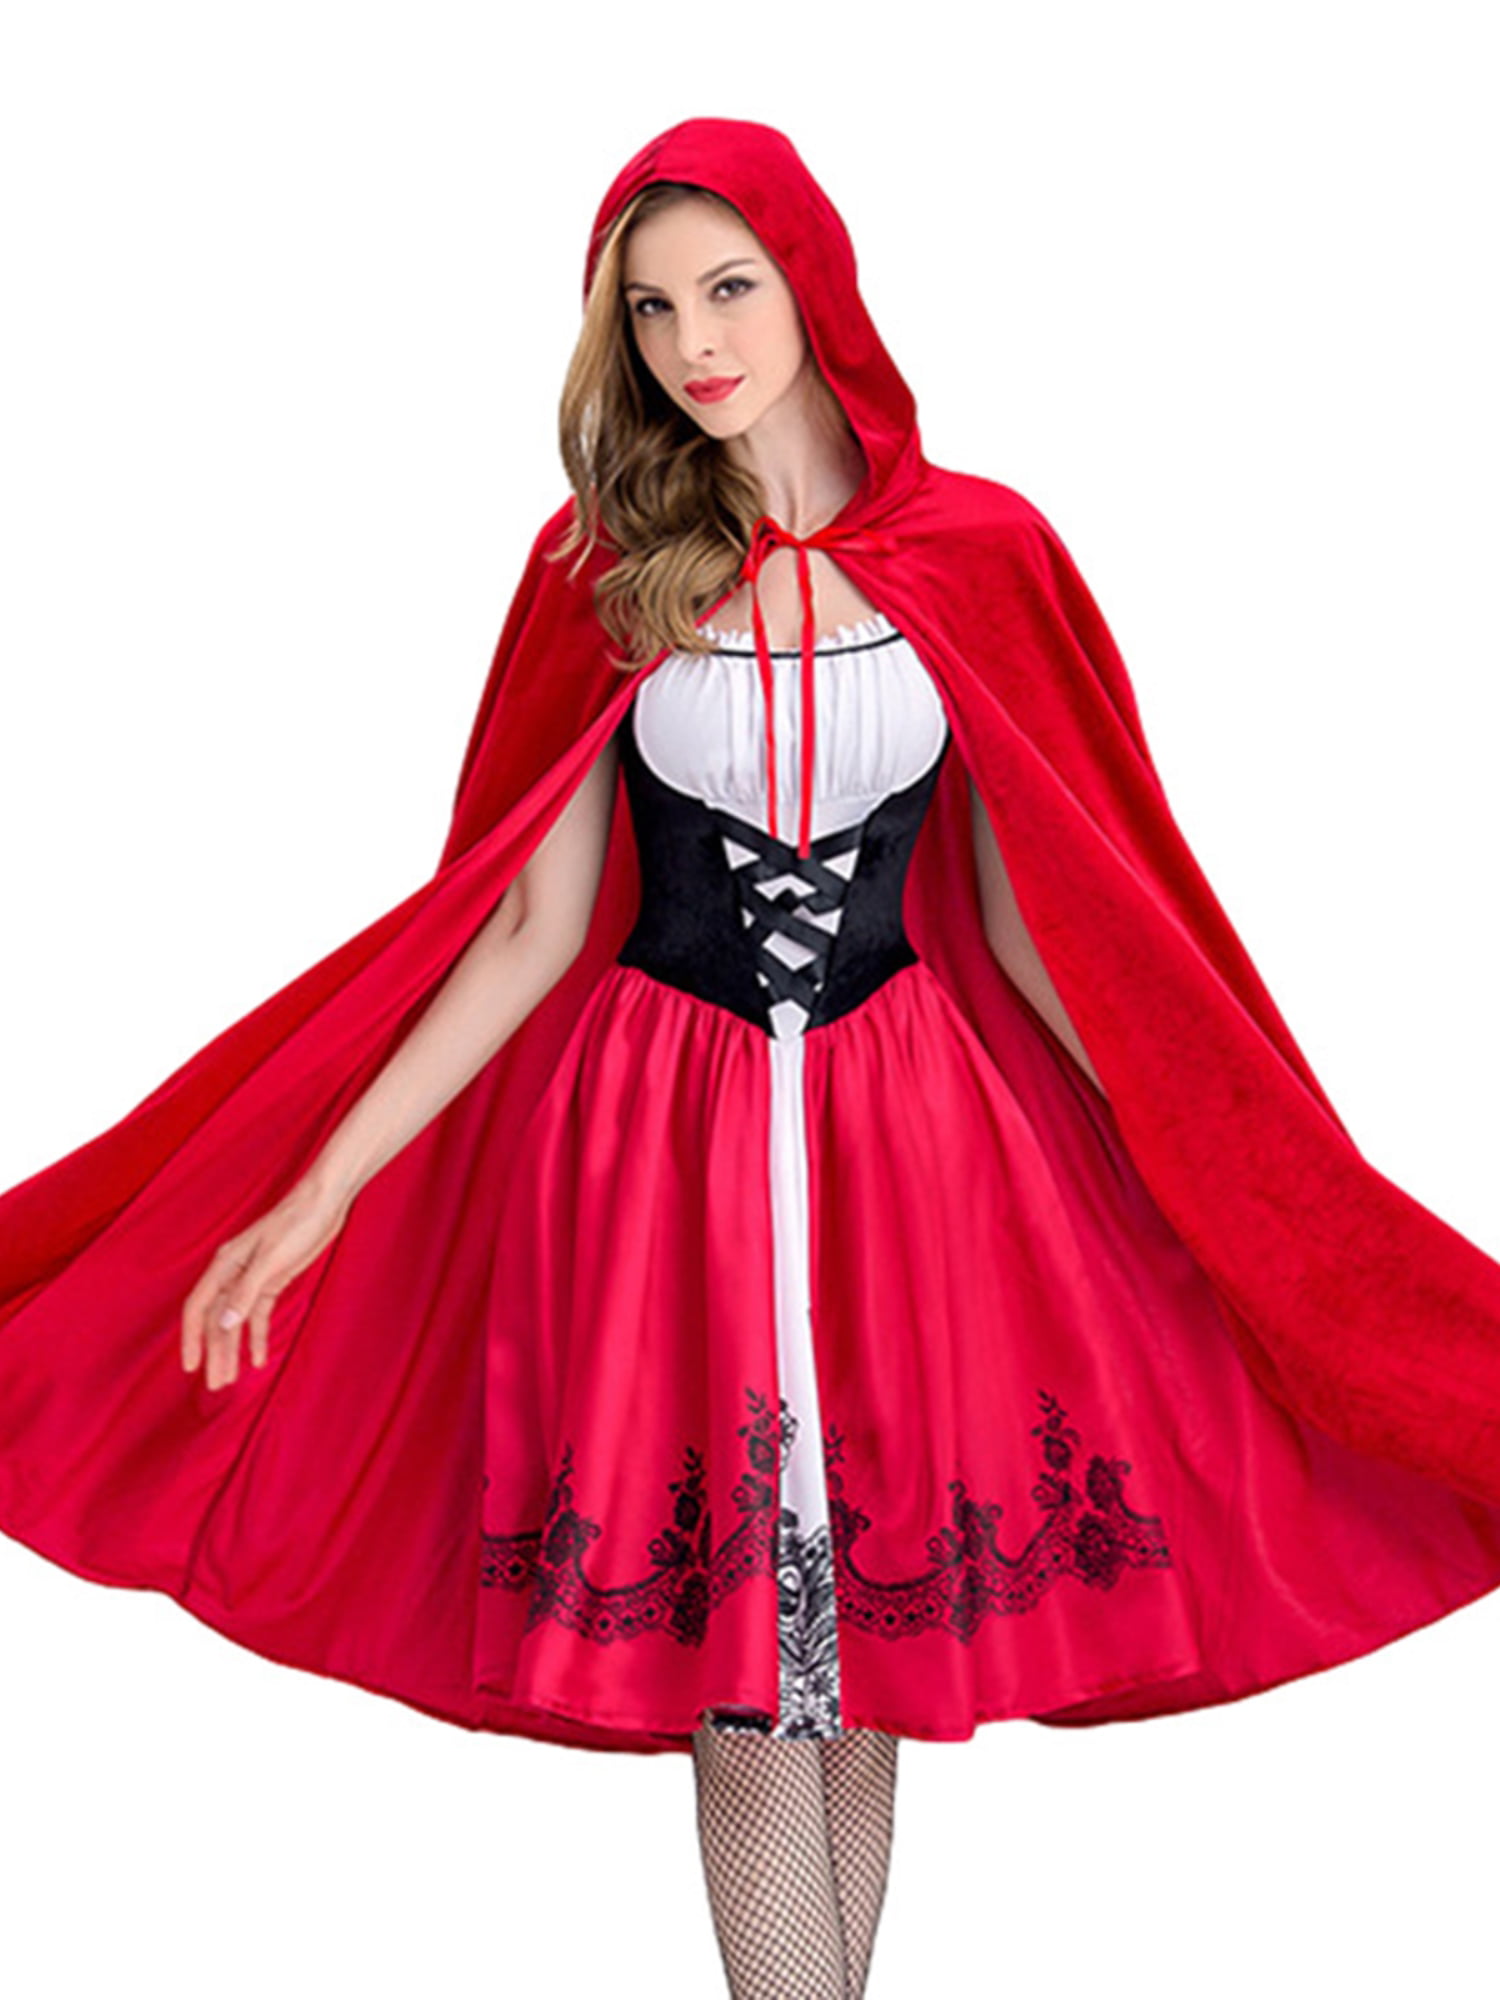 Ladies Long Red Riding Hooded Shoulder Cape Fairytale Book Fancy Dress Costume 